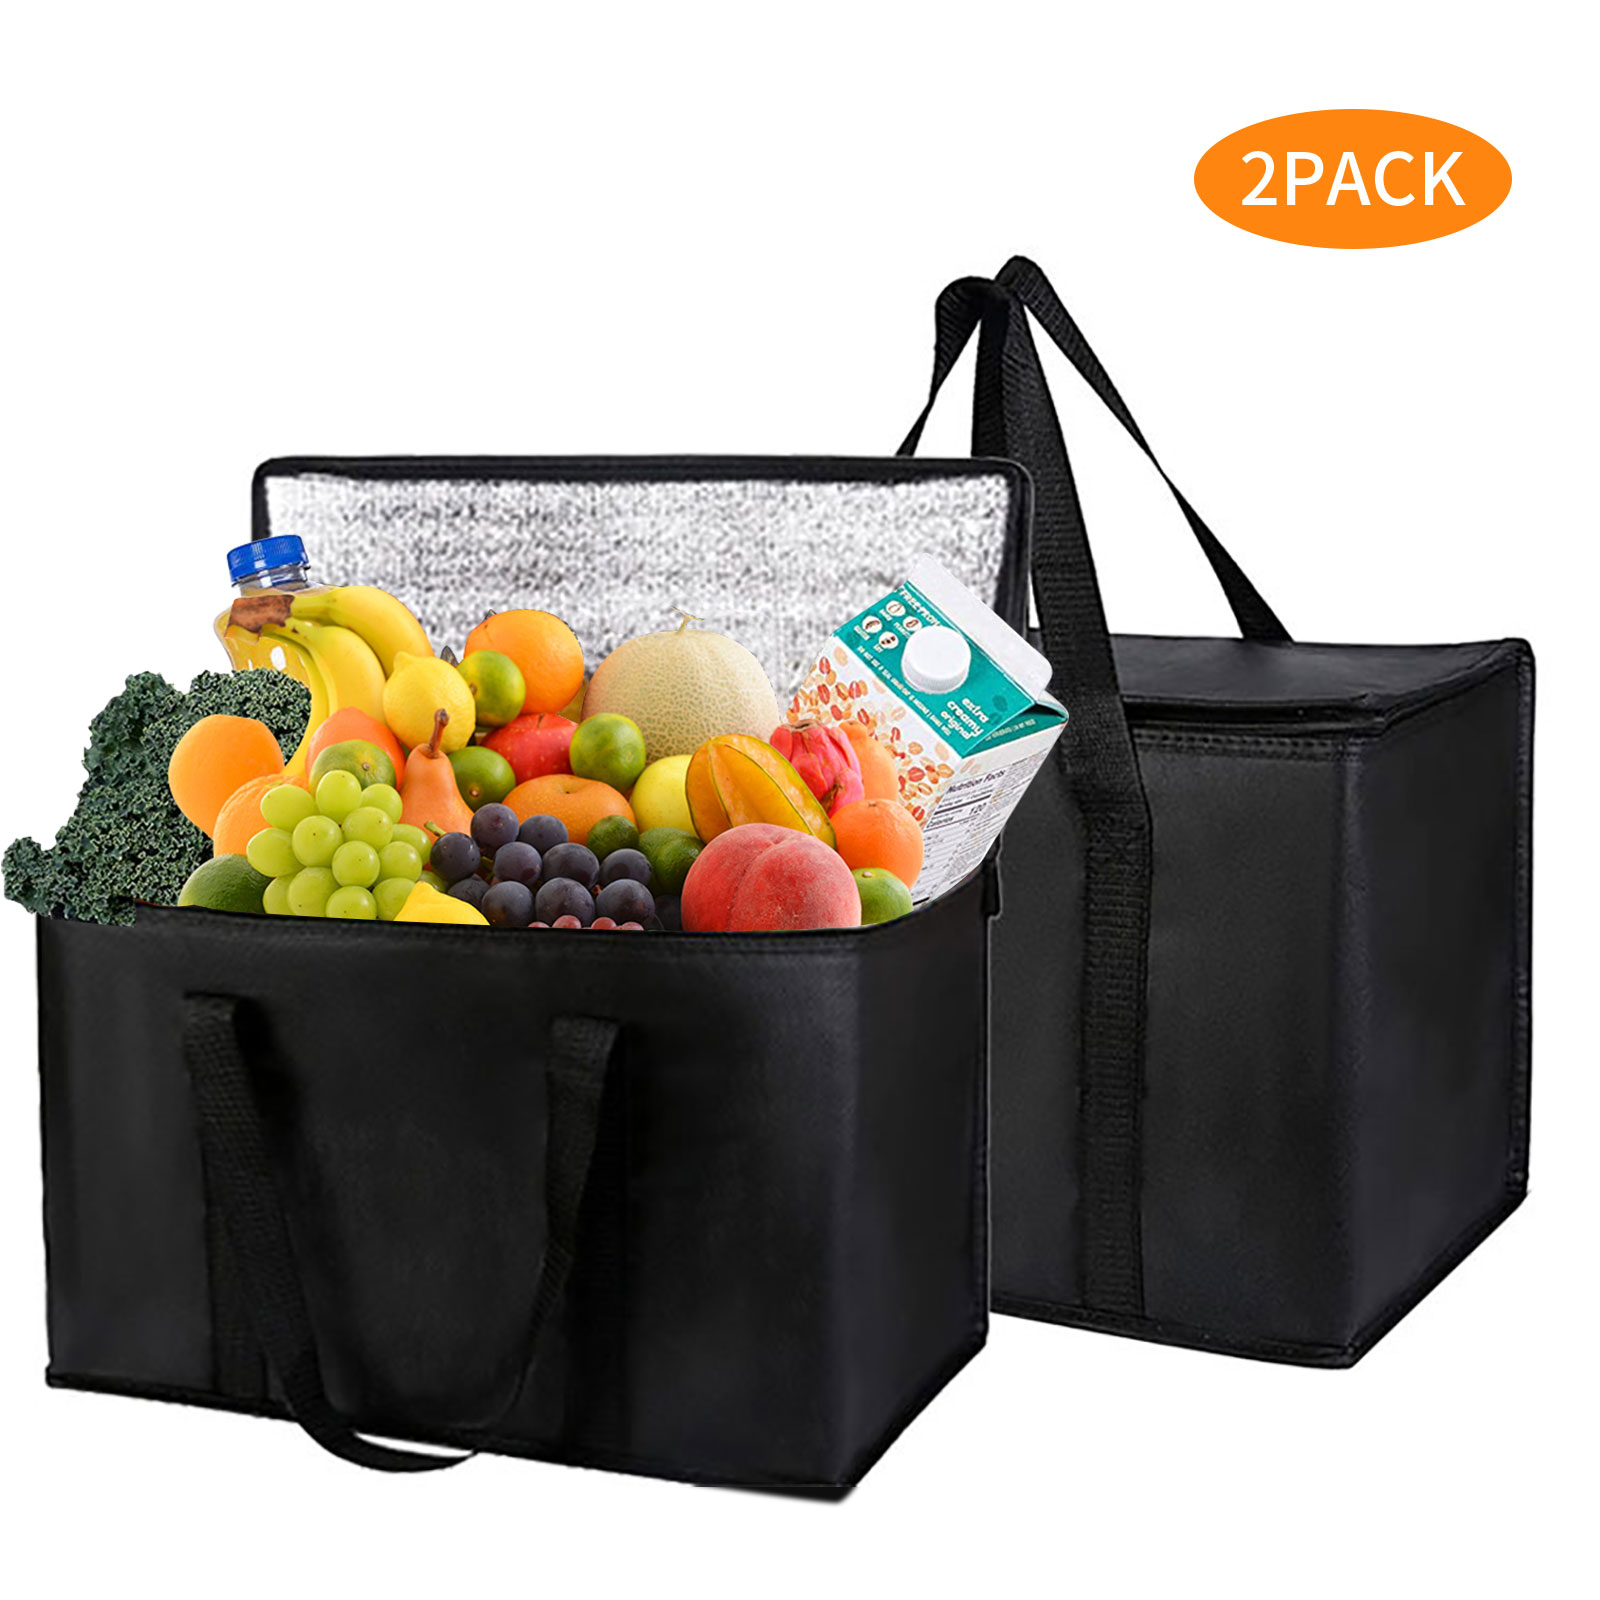 Tripumer 3 Pack Insulated Grocery Shopping Bags Reusable Bag Thermal ...